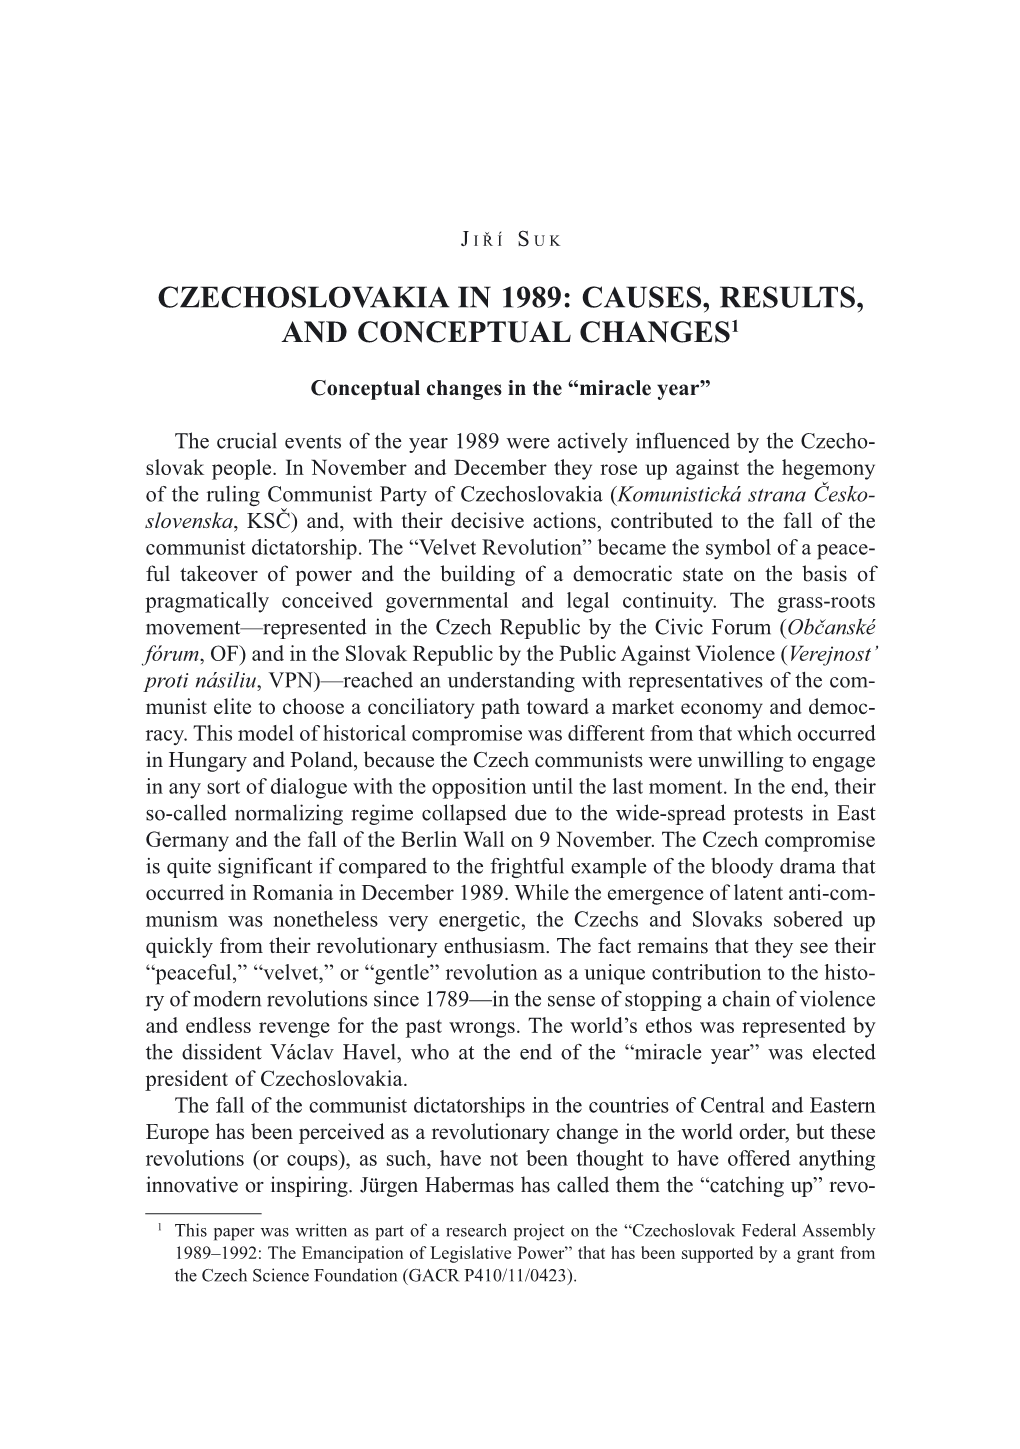 Czechoslovakia in 1989: Causes, Results, and Conceptual Changes1